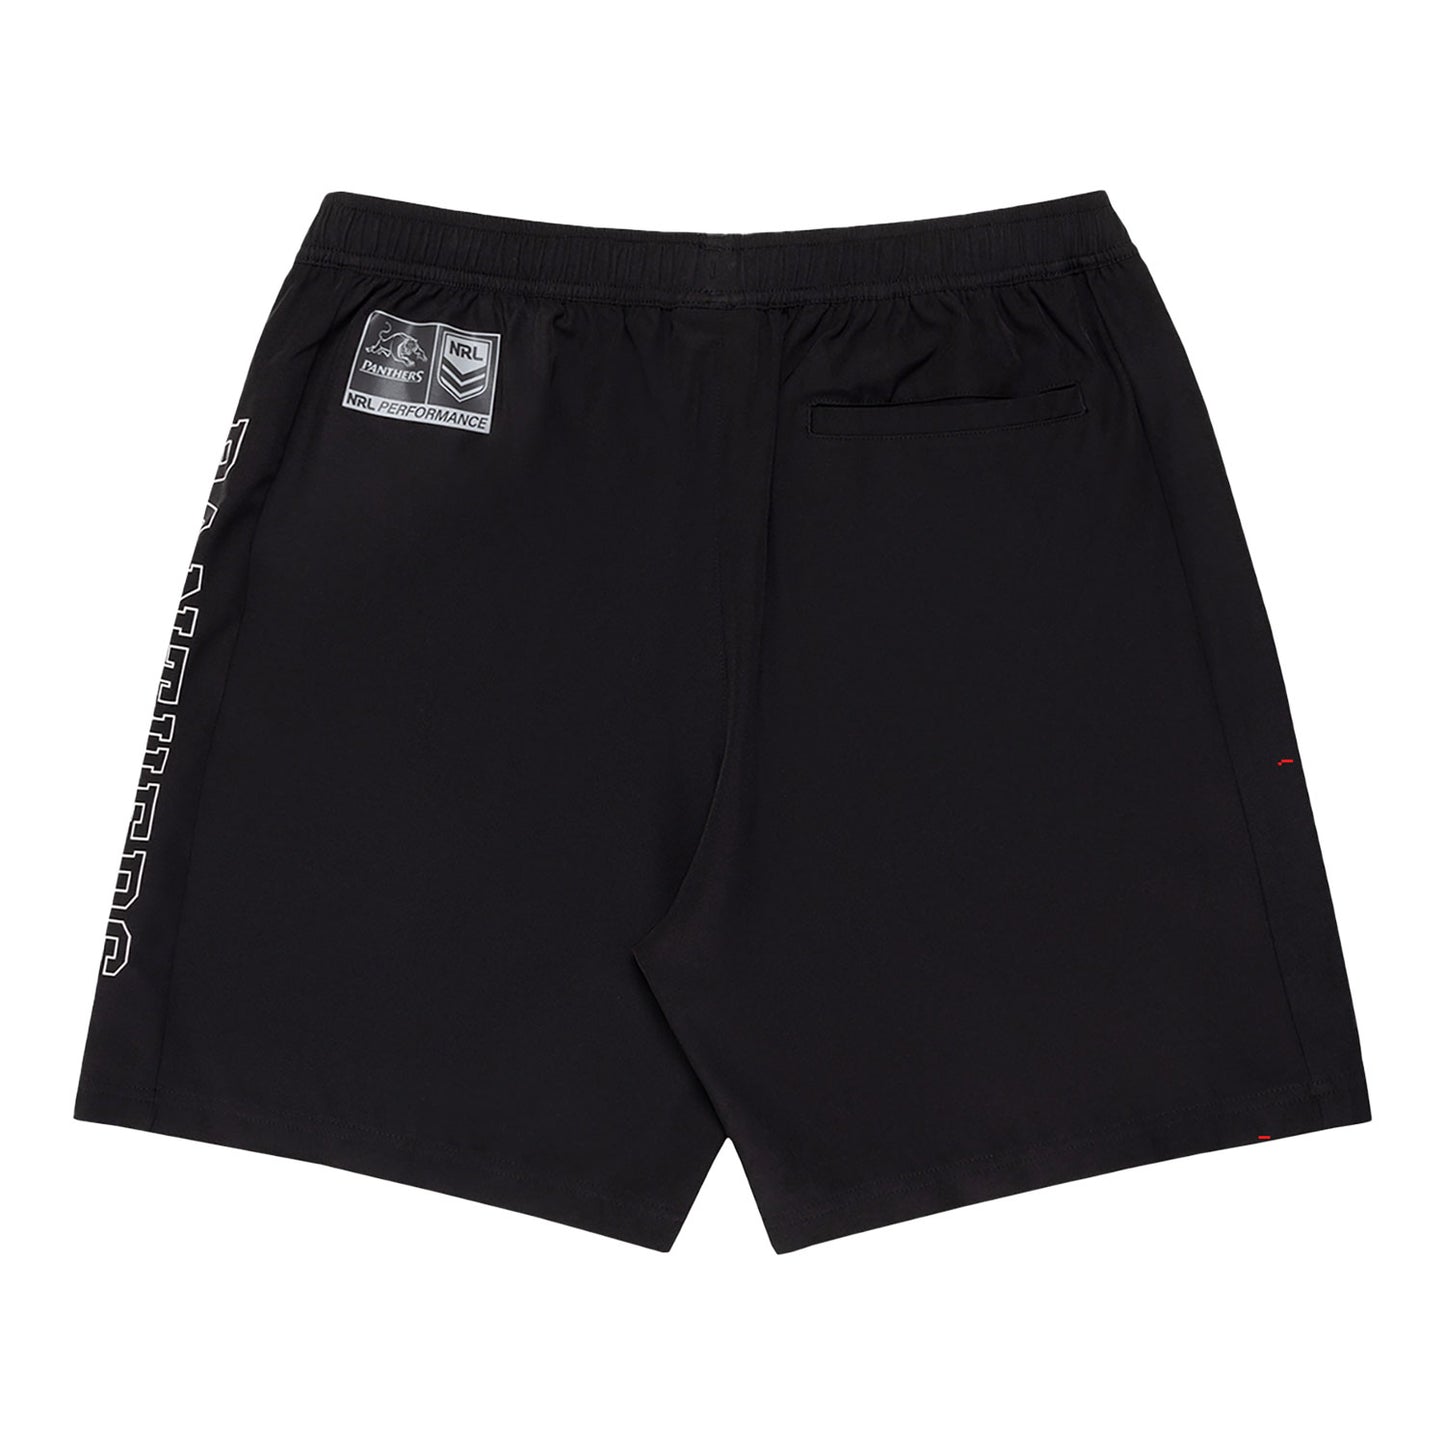 Penrith Panthers Mens Performance Shorts